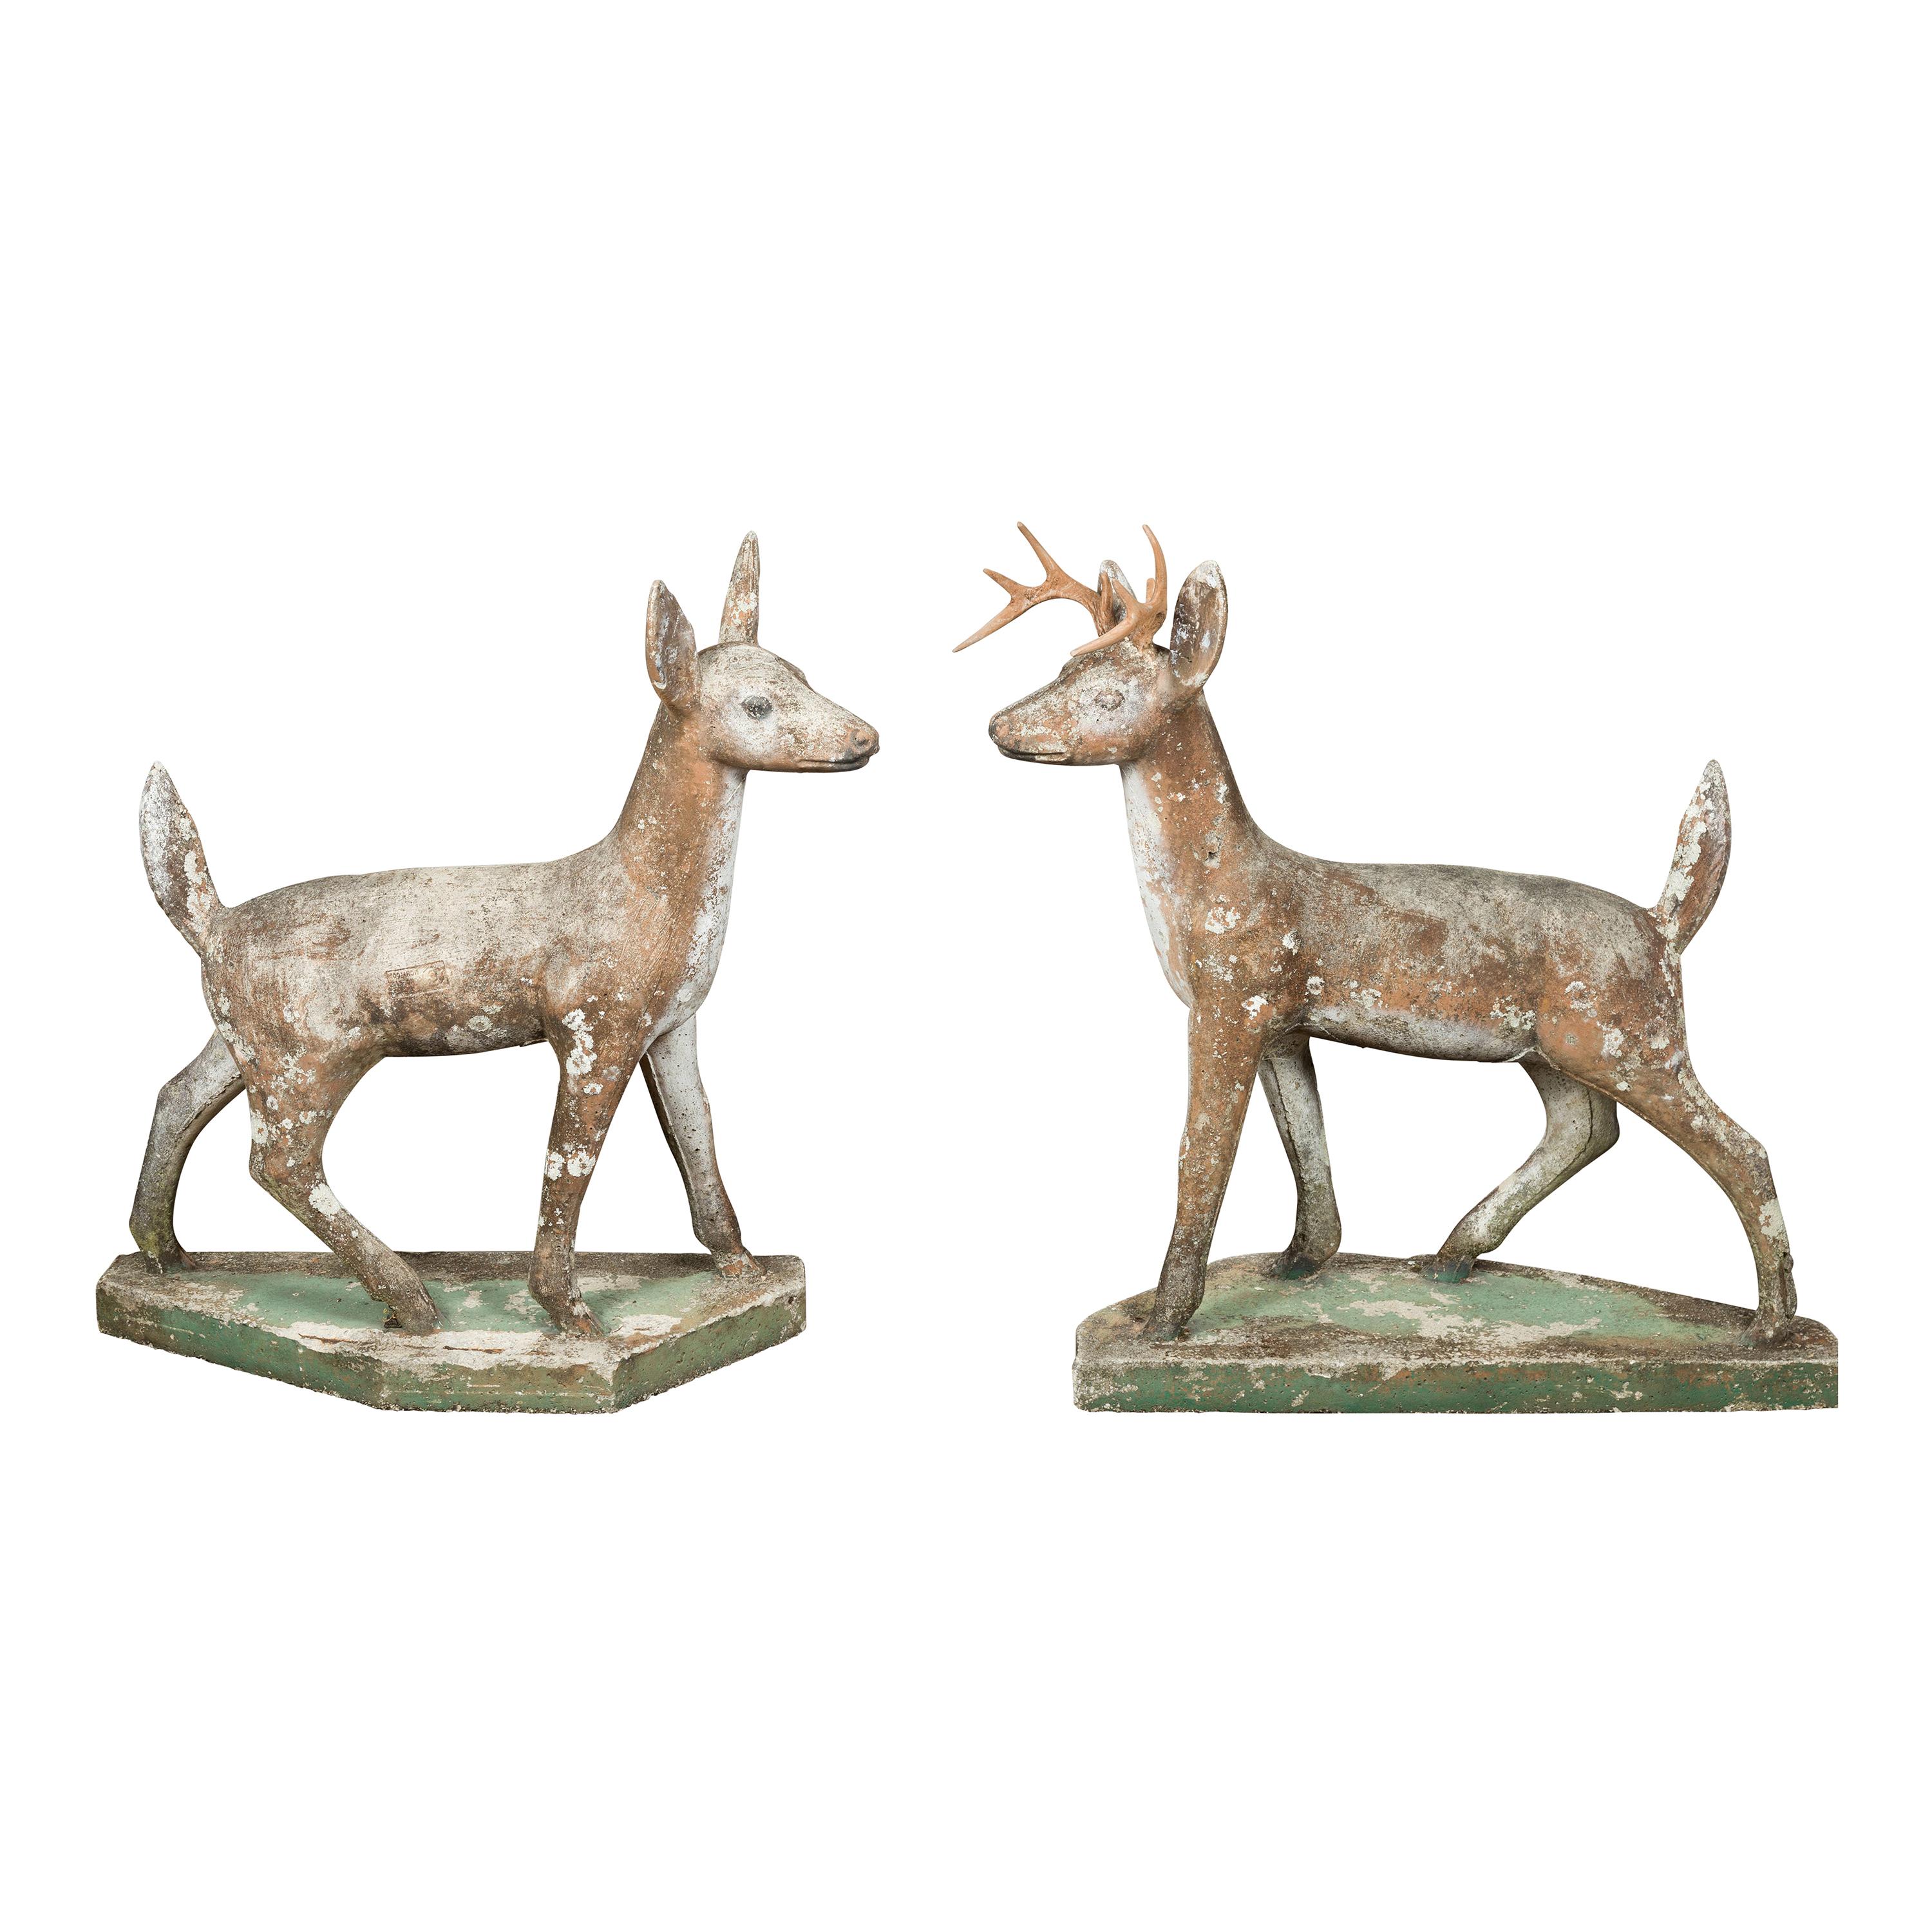 Pair of American 1940s Concrete Deer with Antlers and Green Polygonal Bases